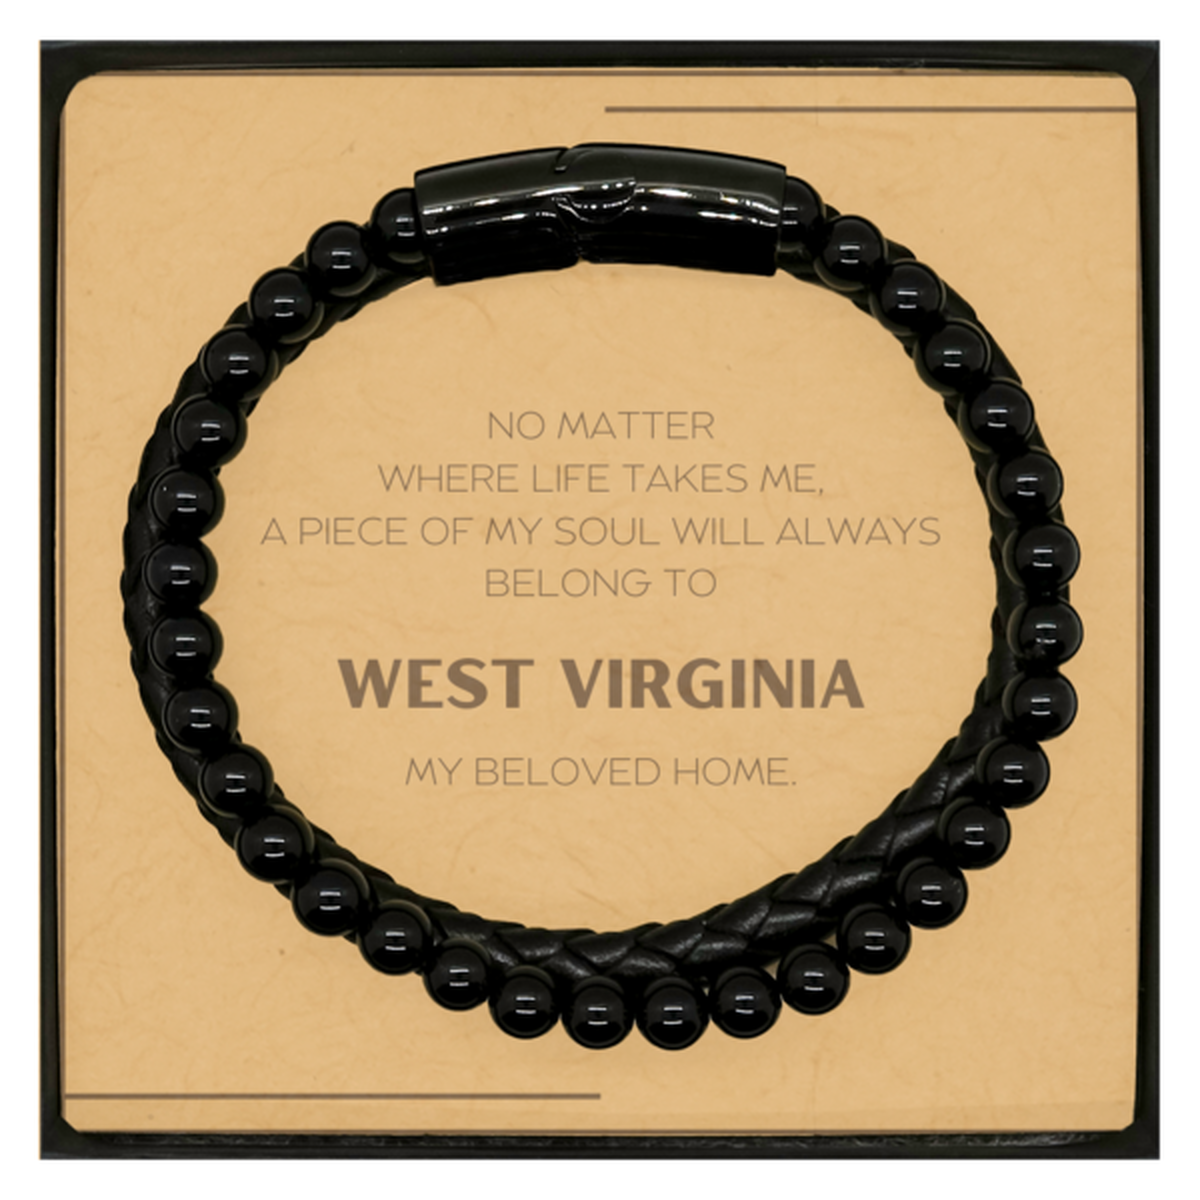 Love West Virginia State Gifts, My soul will always belong to West Virginia, Proud Stone Leather Bracelets, Birthday Christmas Unique Gifts For West Virginia Men, Women, Friends